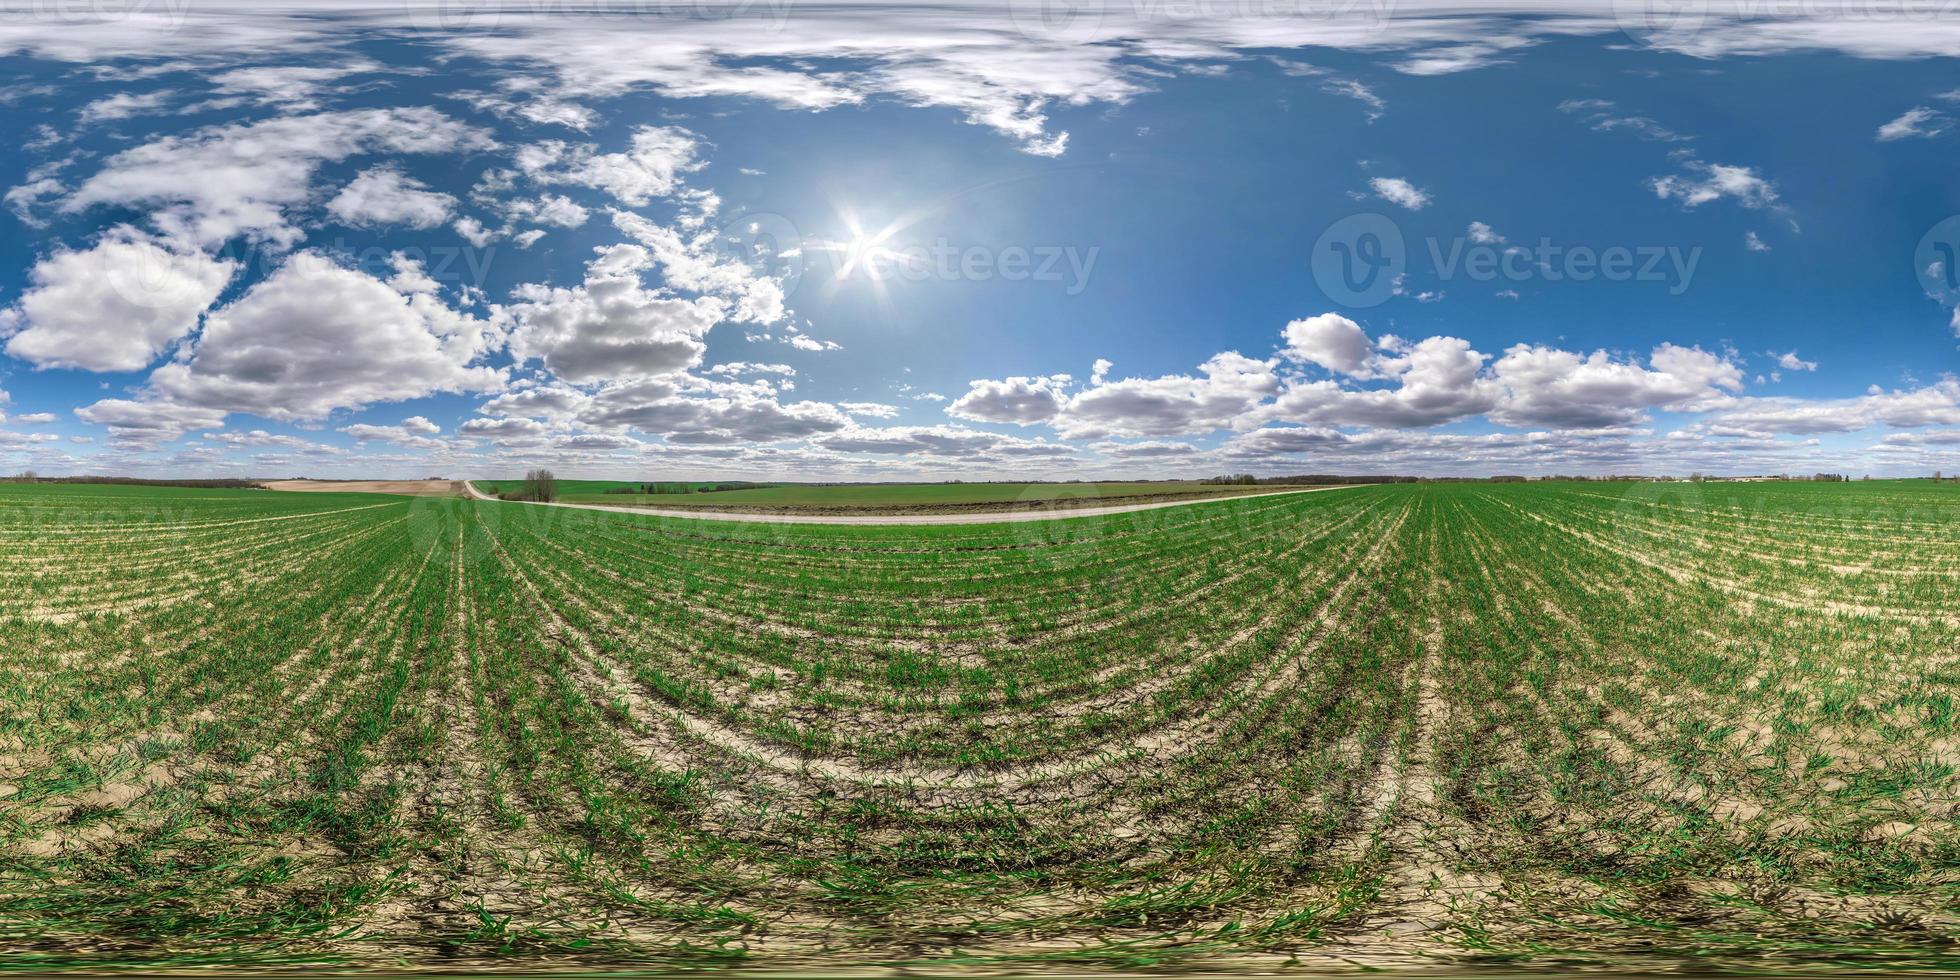 full seamless spherical hdri panorama 360 degrees angle view on among fields in spring day with awesome clouds in equirectangular projection, ready for VR AR virtual reality content photo